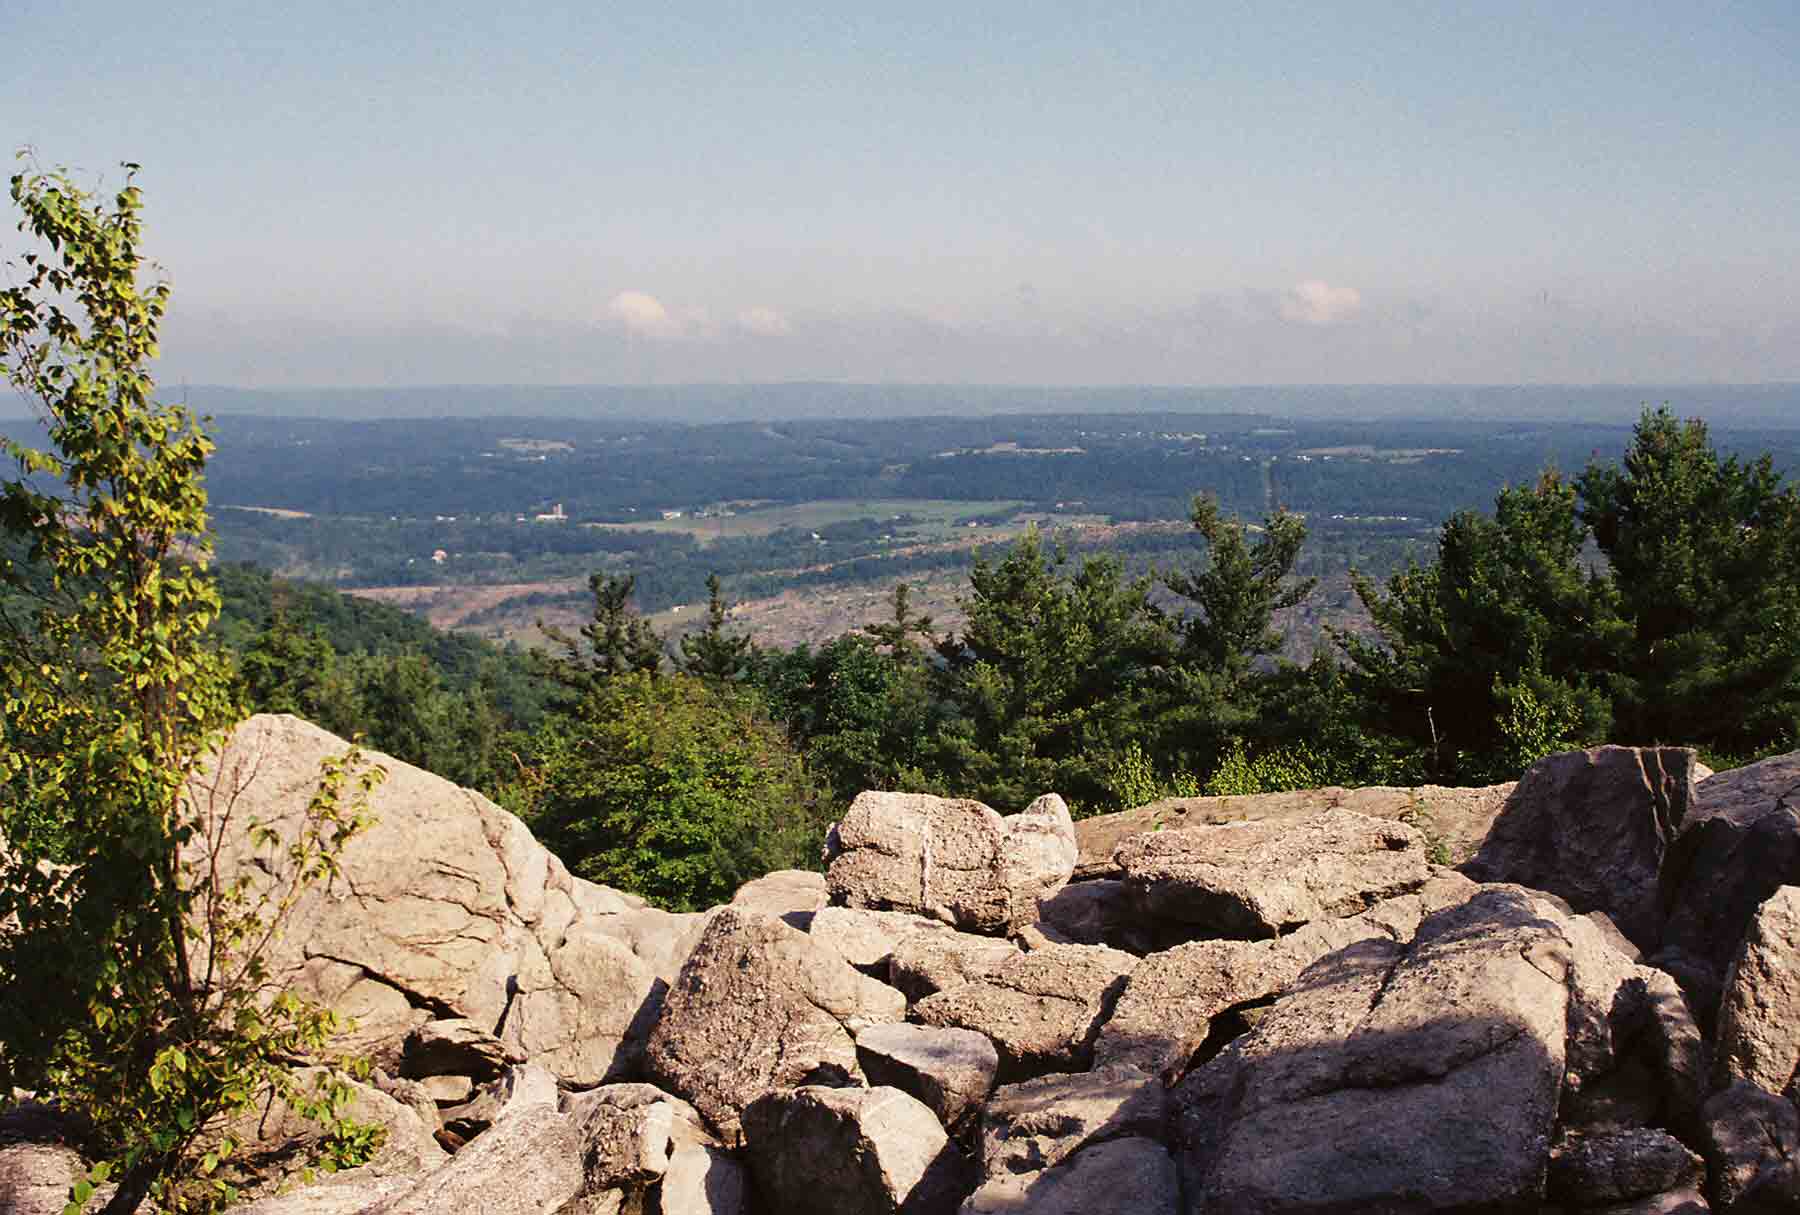 mm 15.1 - View north from Weathering Knob. Courtesy dlcul@conncoll.edu